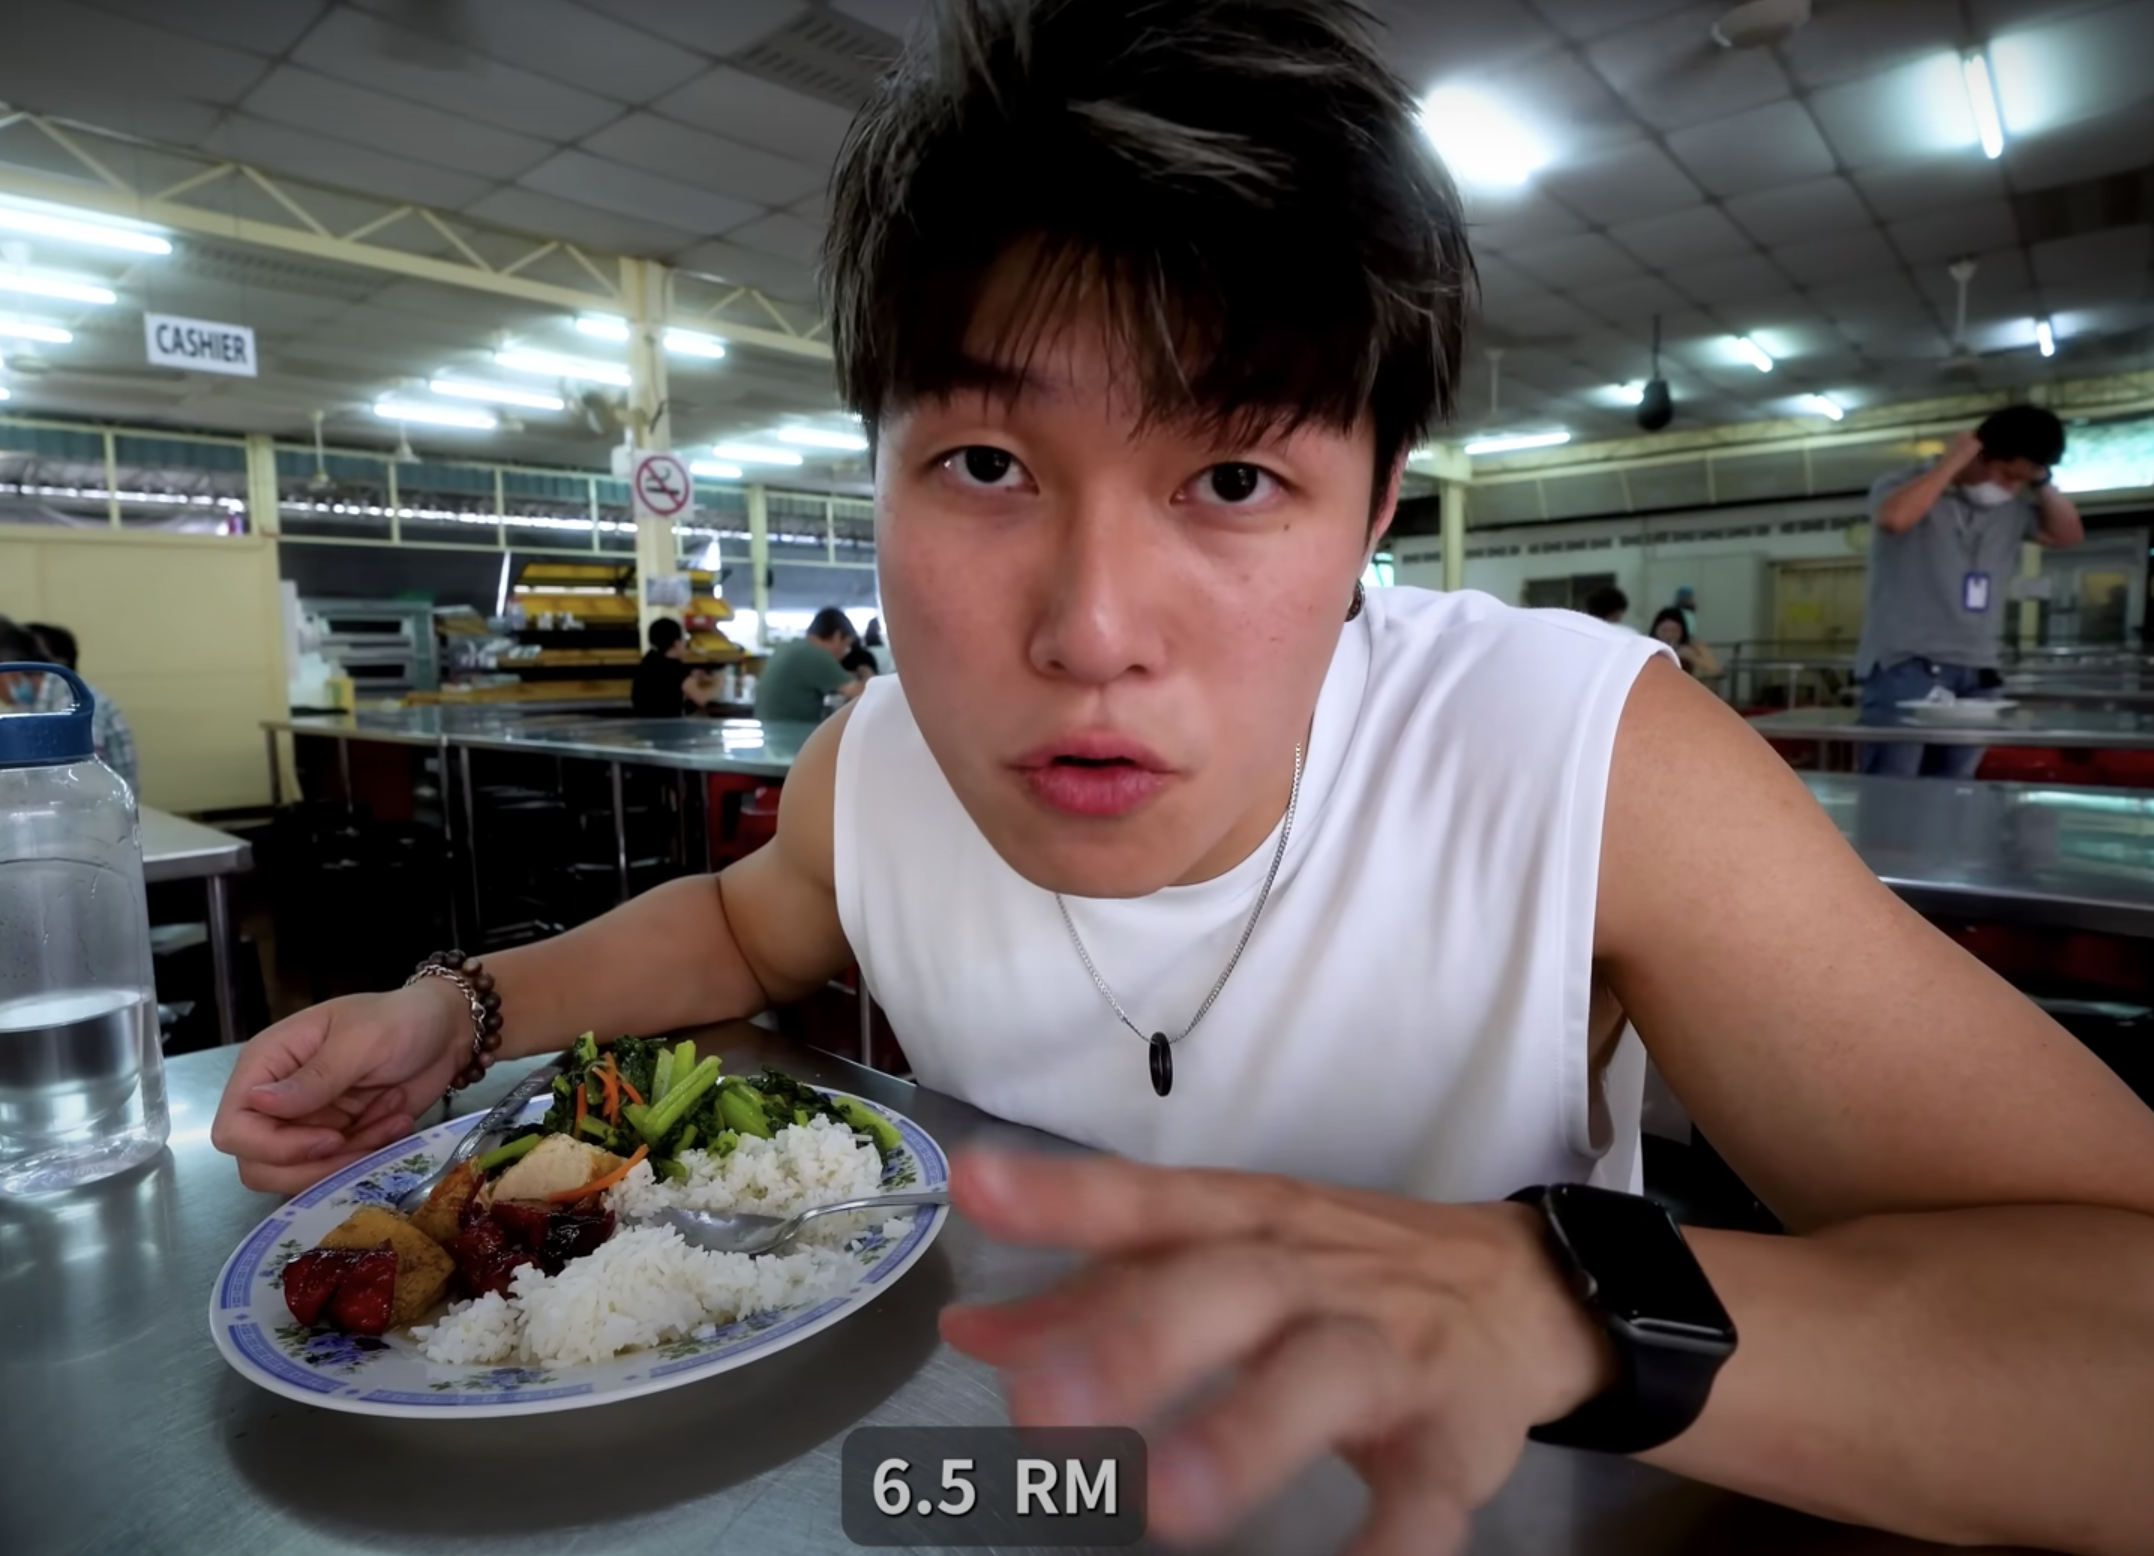 Hk youtuber successfully completes challenge to spend only rm20 a day in kl | weirdkaya